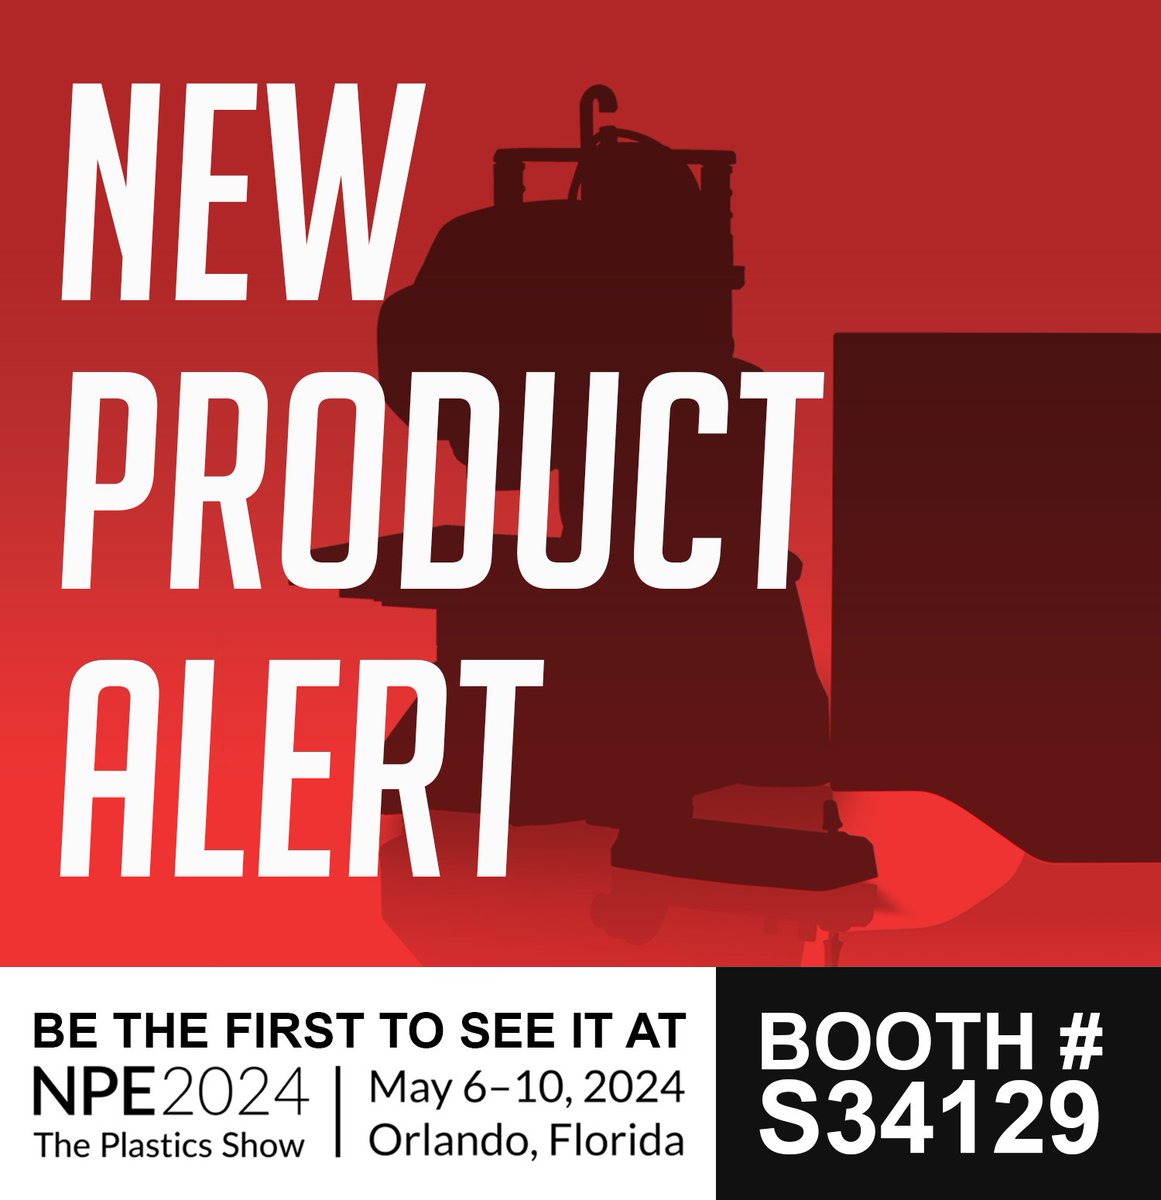 KEYENCE is releasing a new lab tool and we'll be showcasing it for the FIRST TIME at NPE 2024 in Orlando, FL next week! Stop by Booth # S34129 and be the first to check out the latest technology from KEYENCE! #KEYENCE #NewProduct #Tradeshow #NPE2024